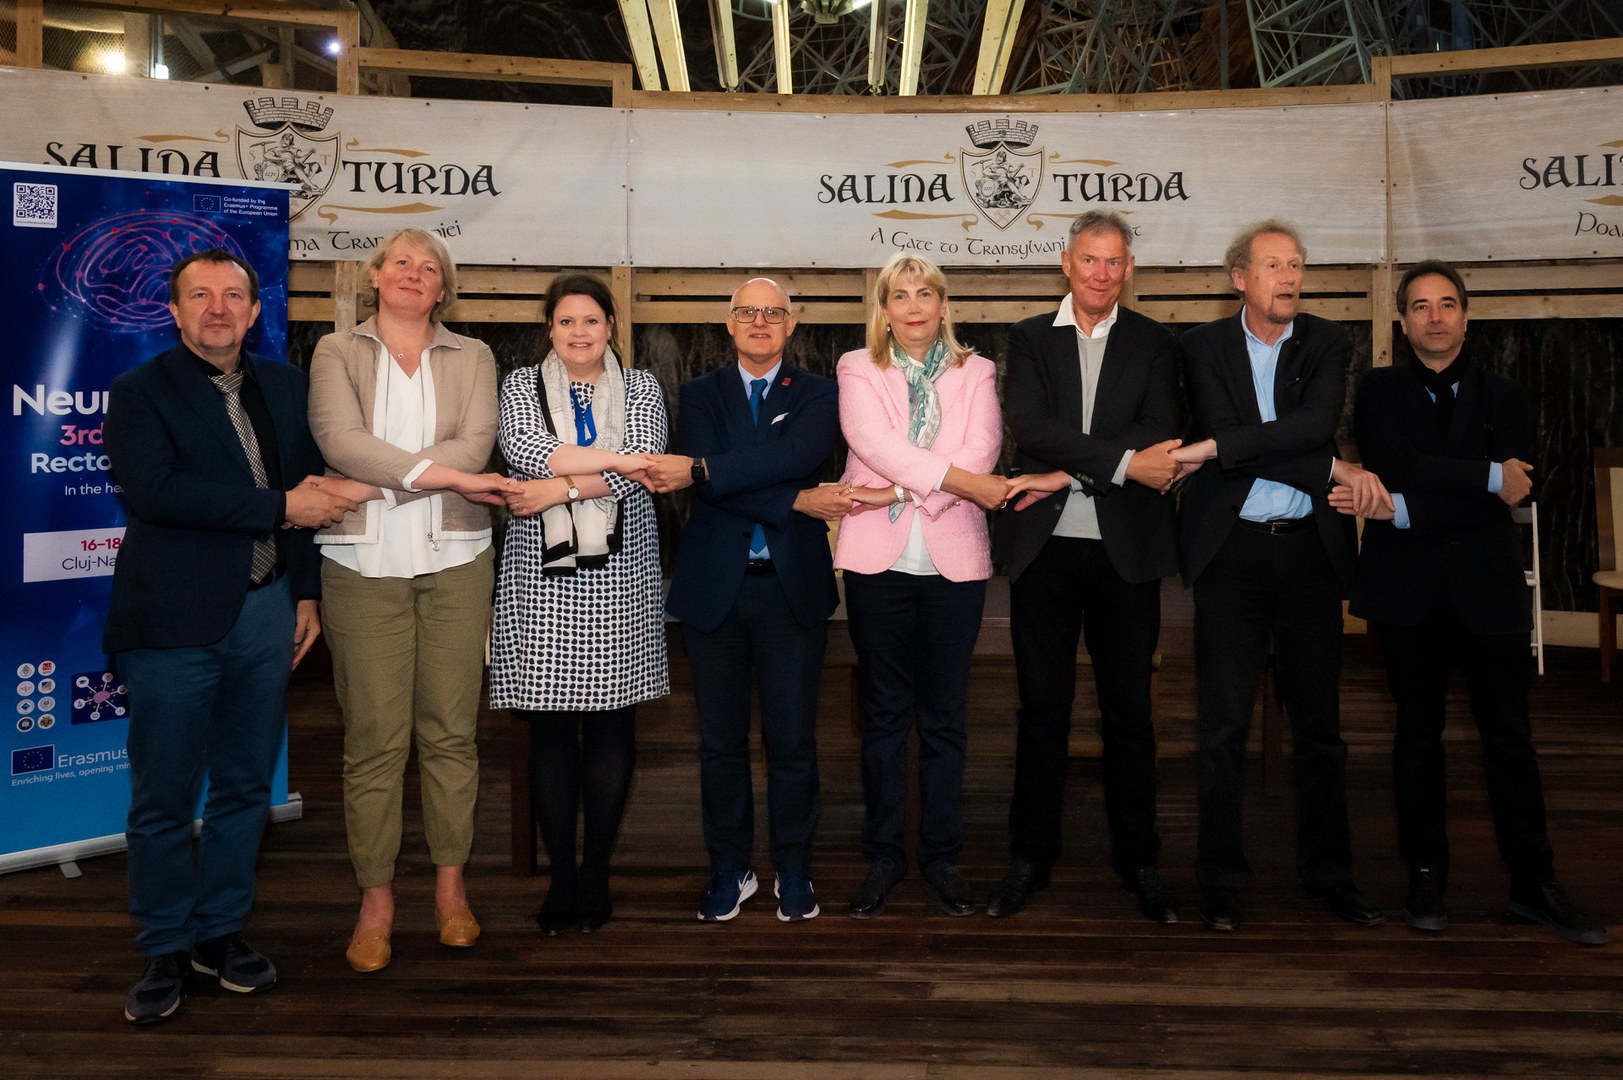 The attending Rectors at the closing event for the three-day meeting in Cluj, following signing of the Third Declaration of the consortium. - The University of Bonn represented by Vice Rector Prof. Dr. Birgit Ulrike Münch (3rd from left).